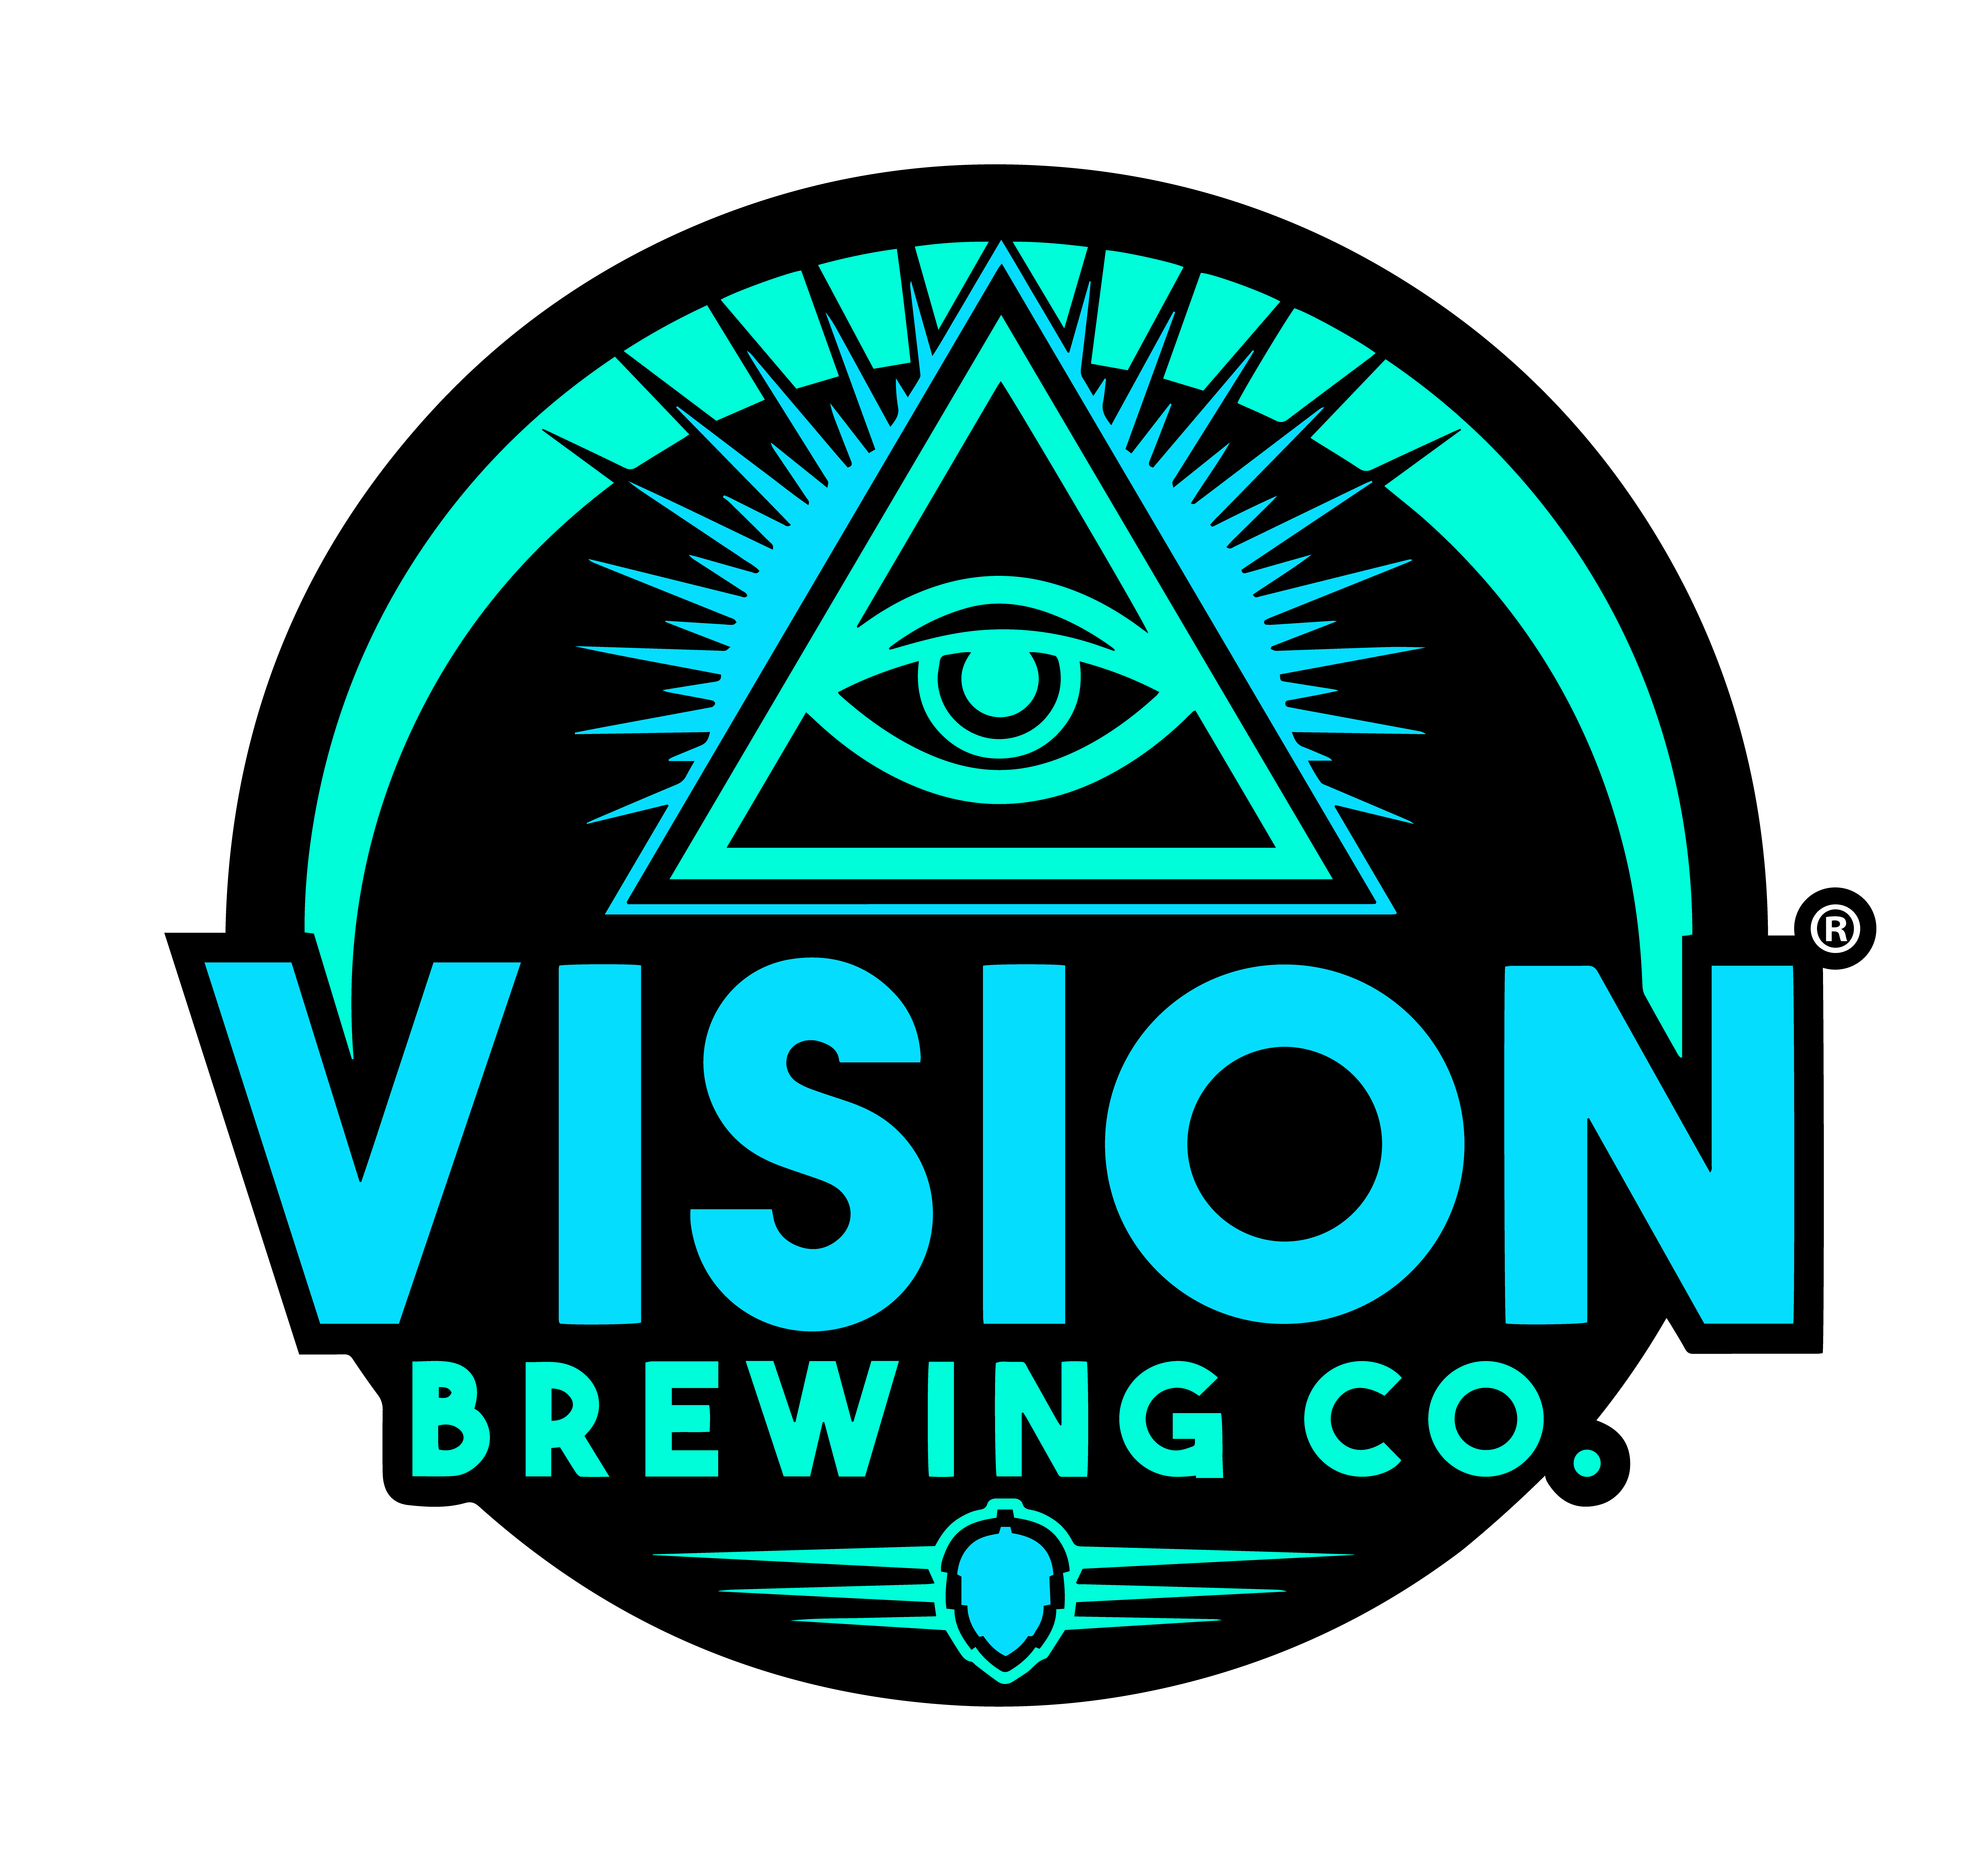 Vision Brewing Logo - World Class Beer and Cider - a circle behind the words VISION BREWING CO., a crescent, a starburst behind a triangle with an eye inside it, and a hop flower with decorative lines